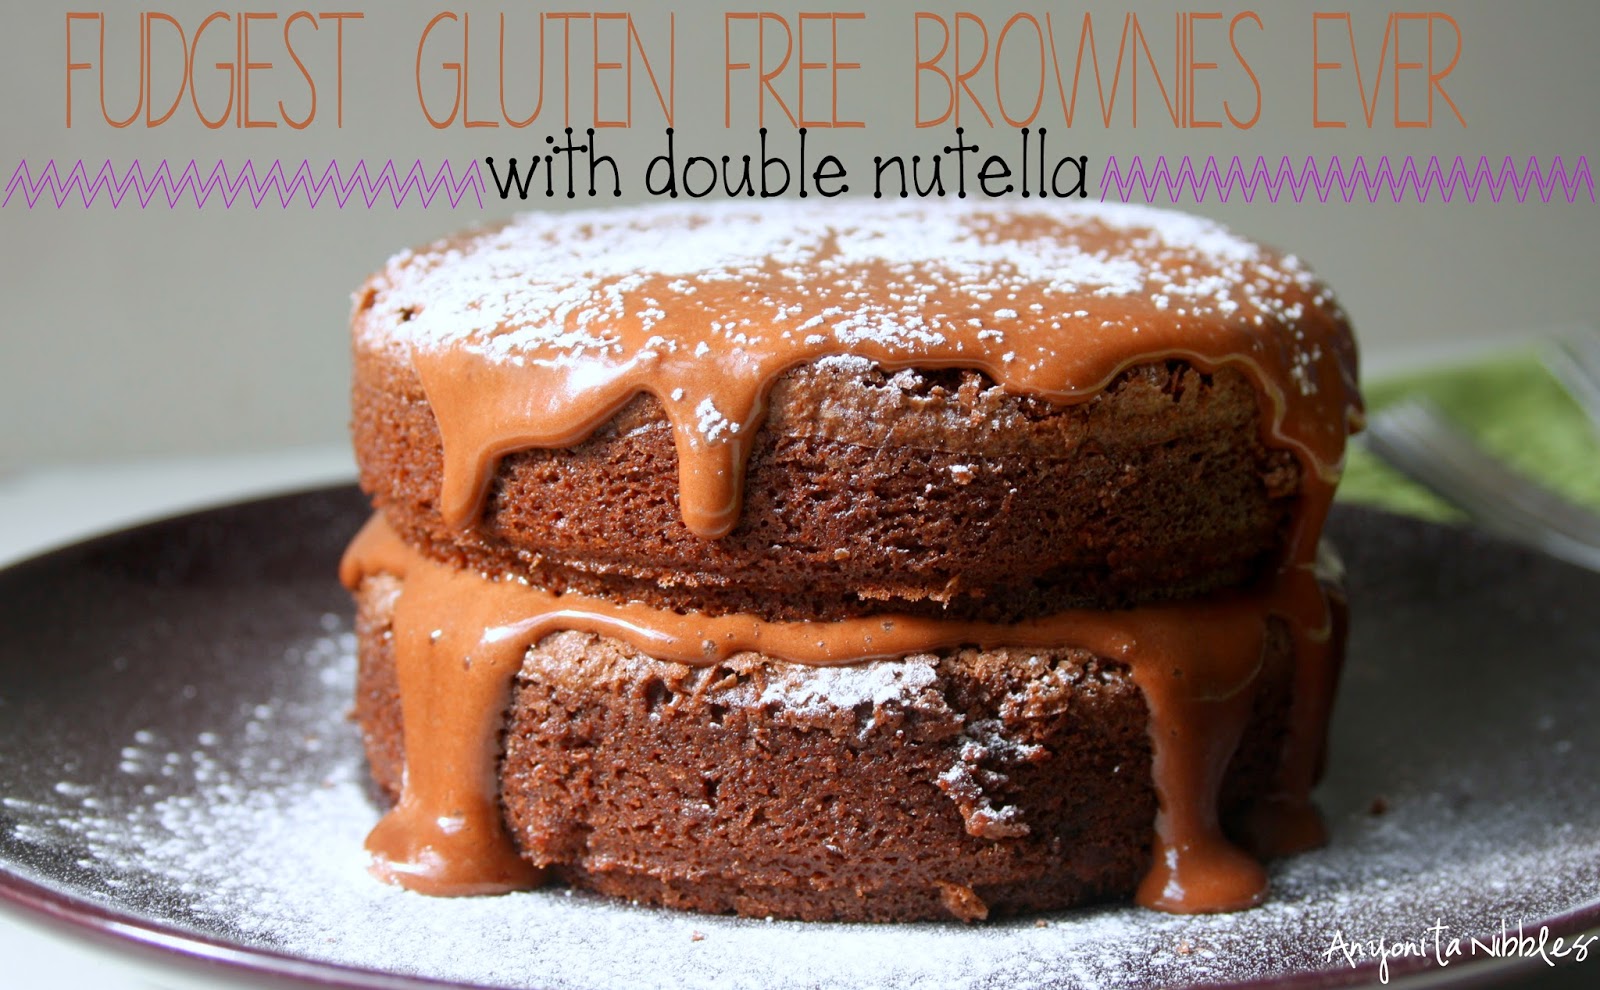 The fudgiest gluten free brownies ever. No dispute. from Anyonita Nibbles